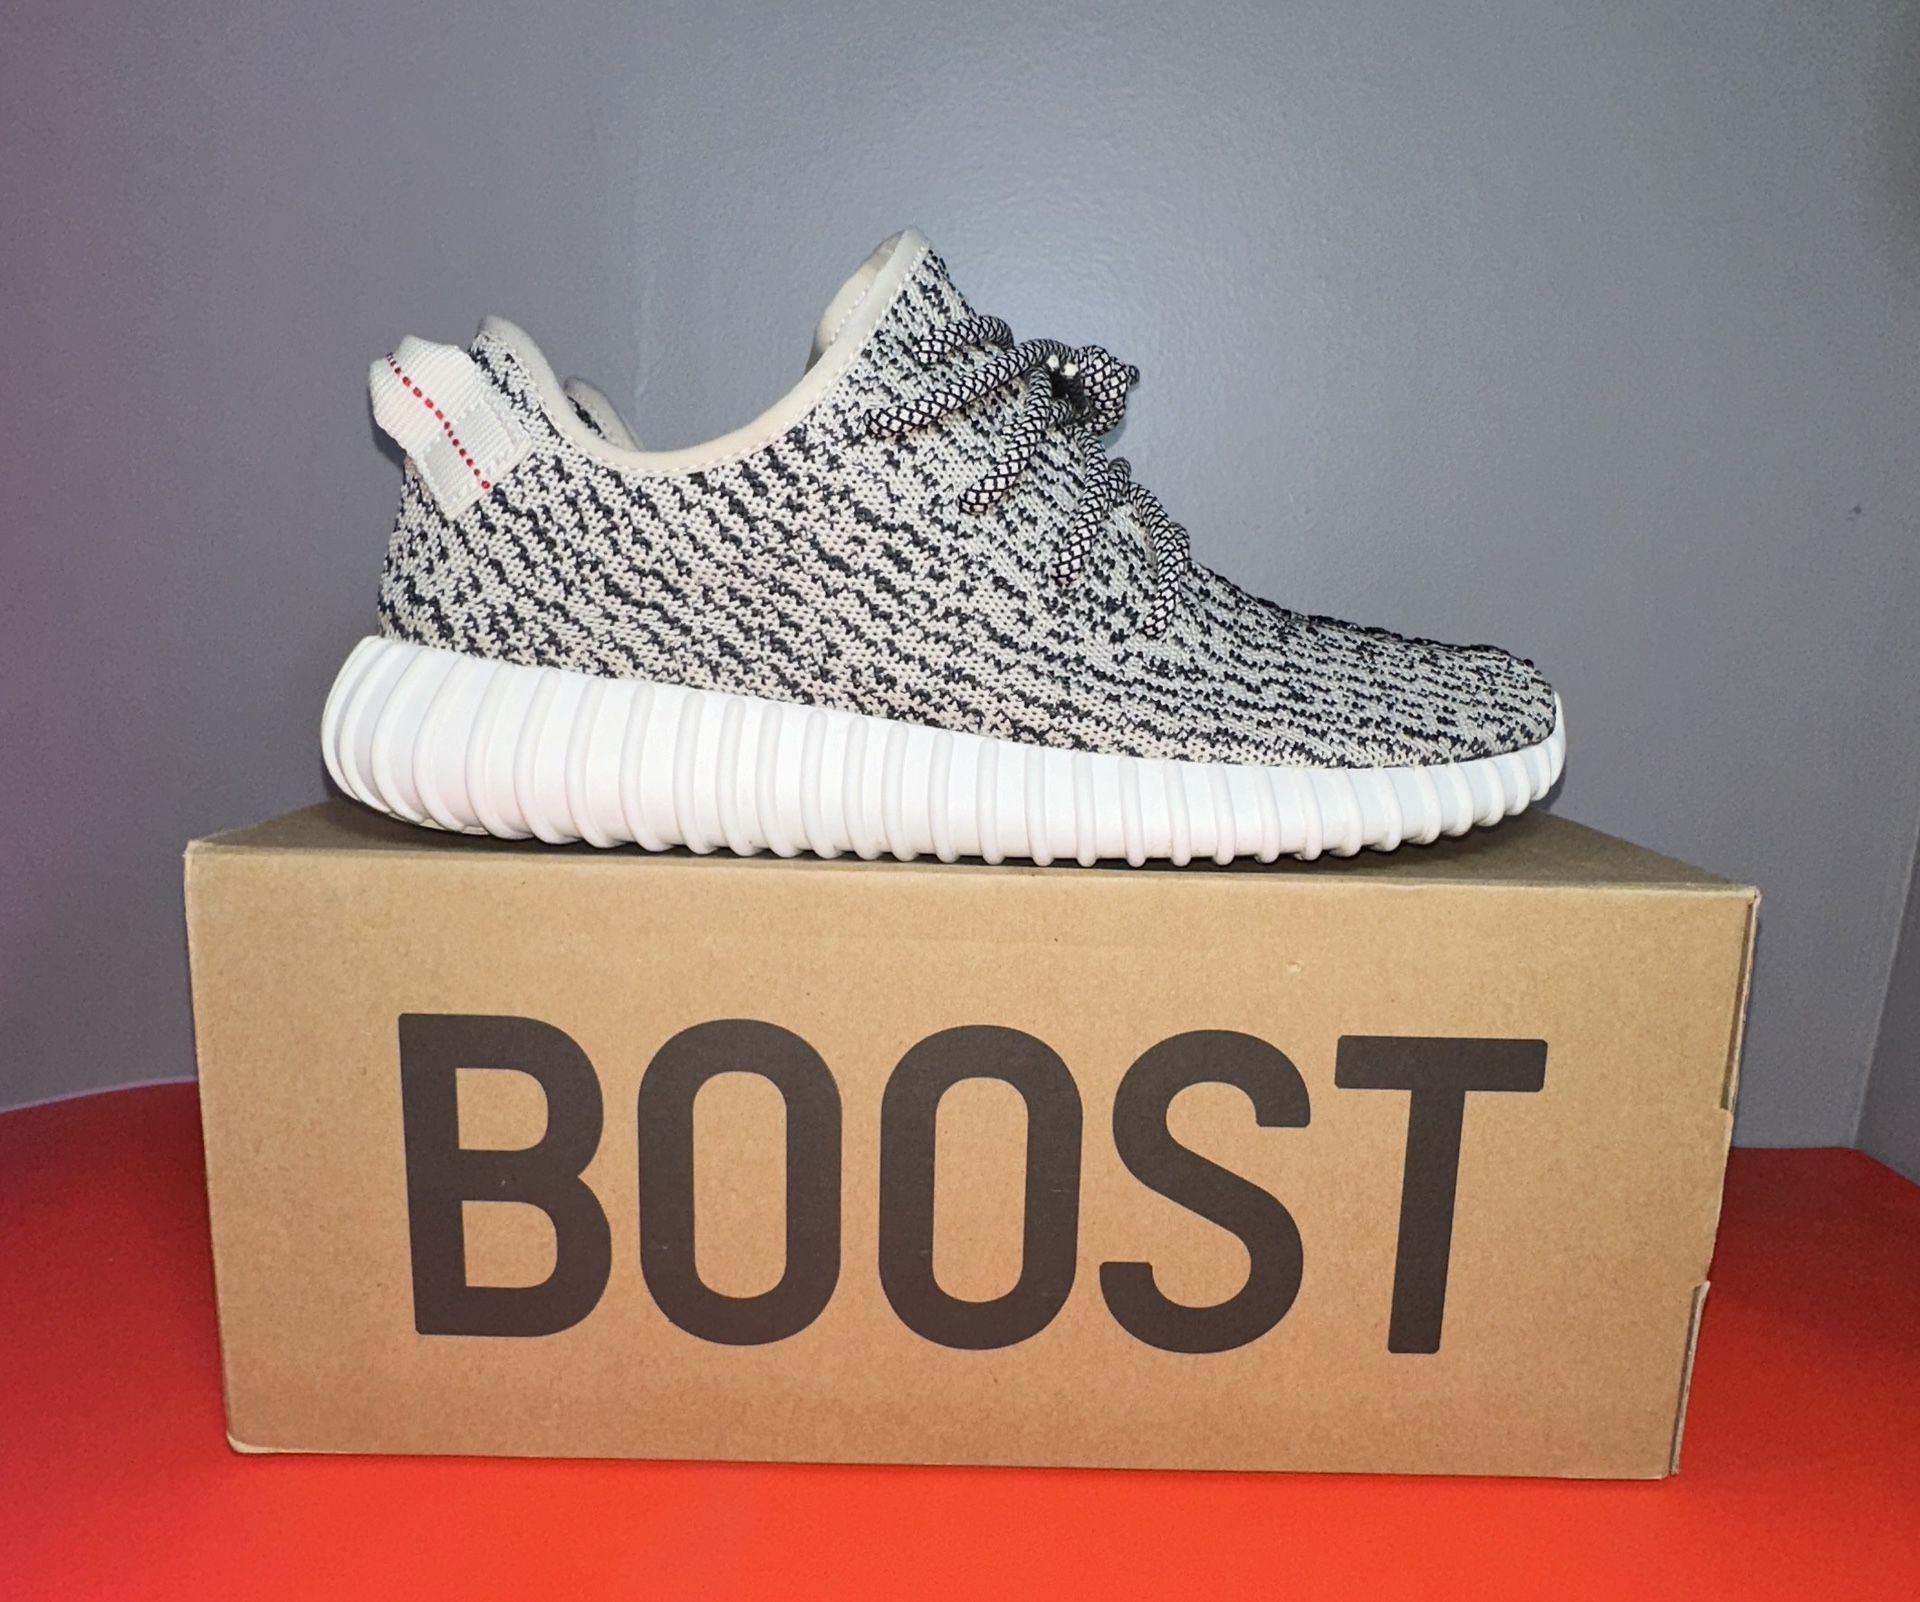 Size 9 - adidas Yeezy Boost 350 Low Turtle Dove